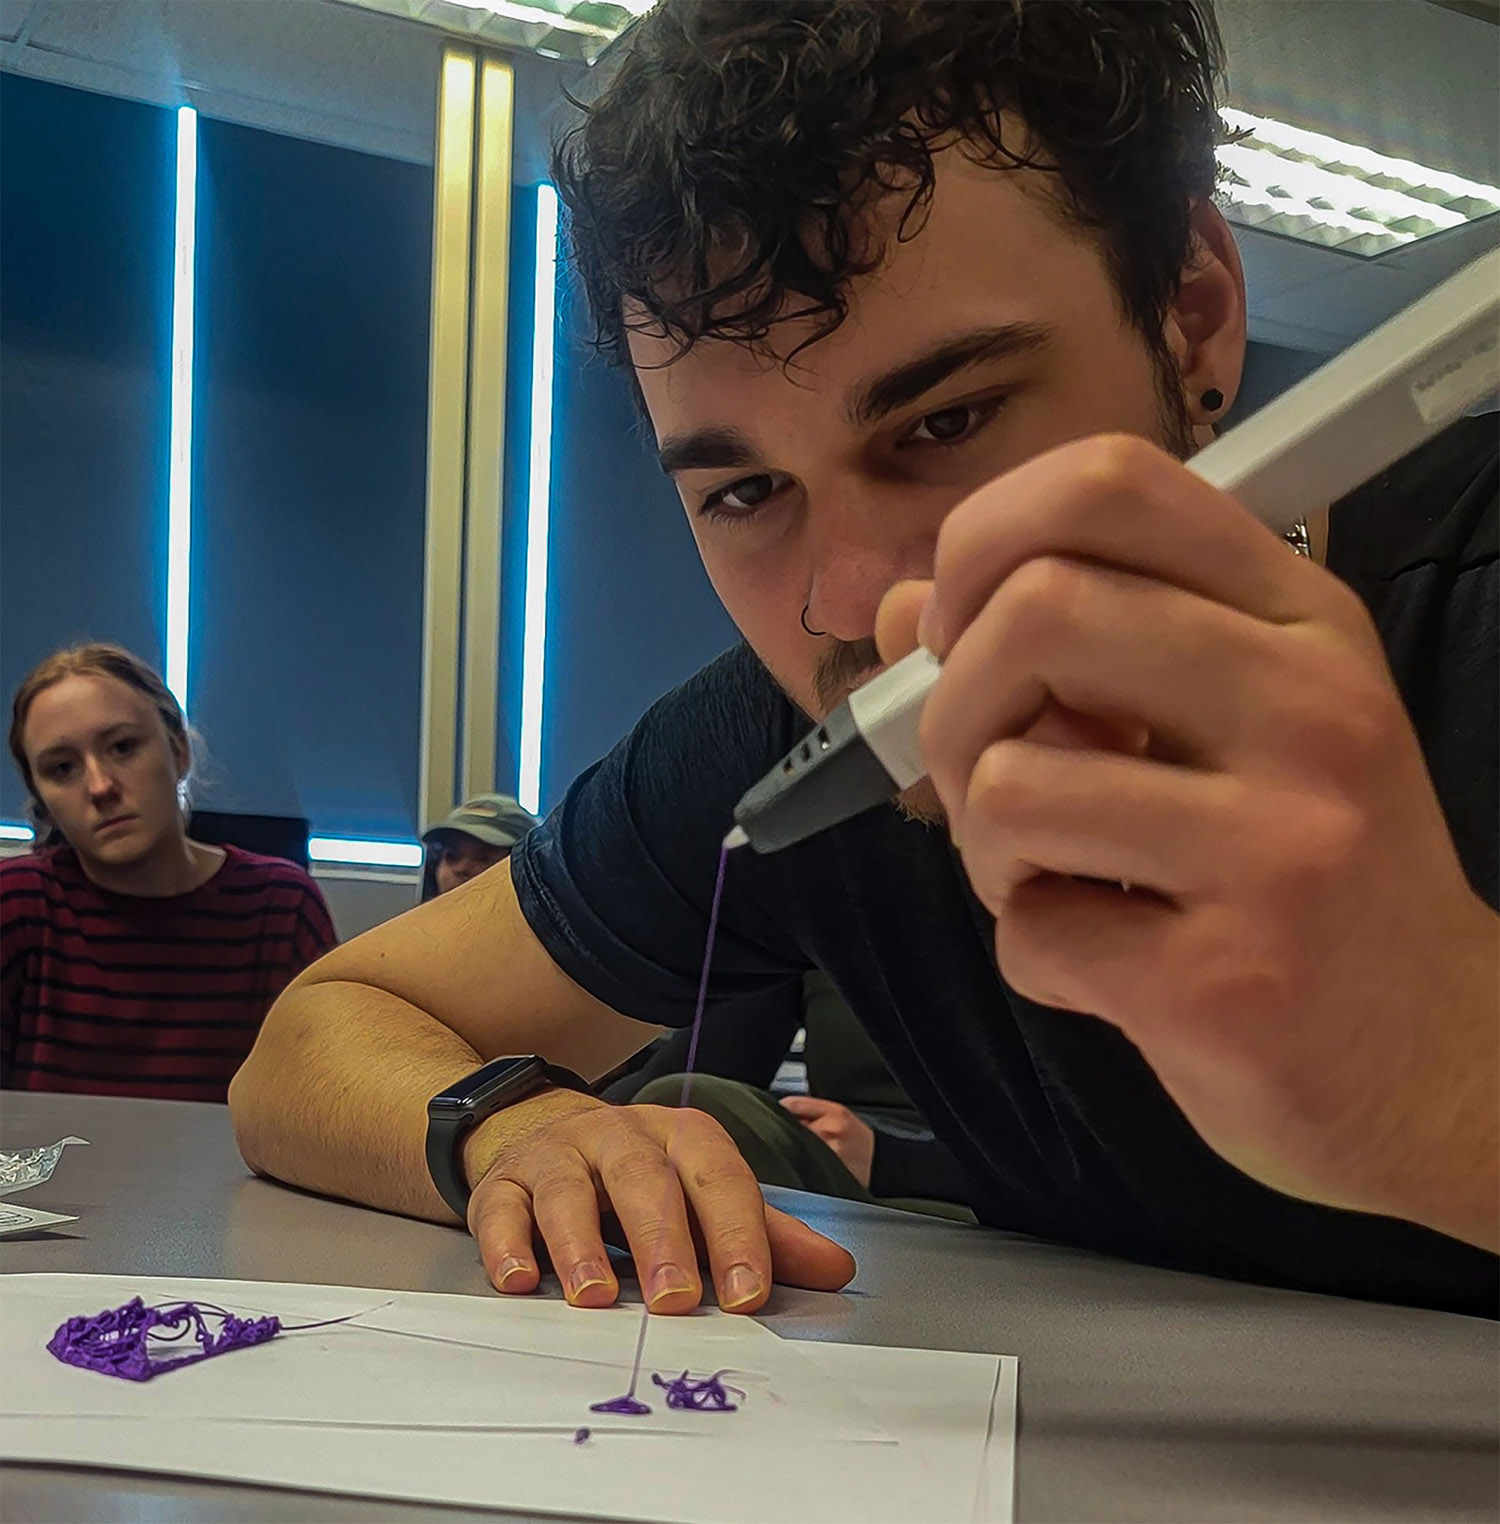 Digital Art + Technology, students experimenting with 3D Printing Pens as part of the digital fabrication demonstration.